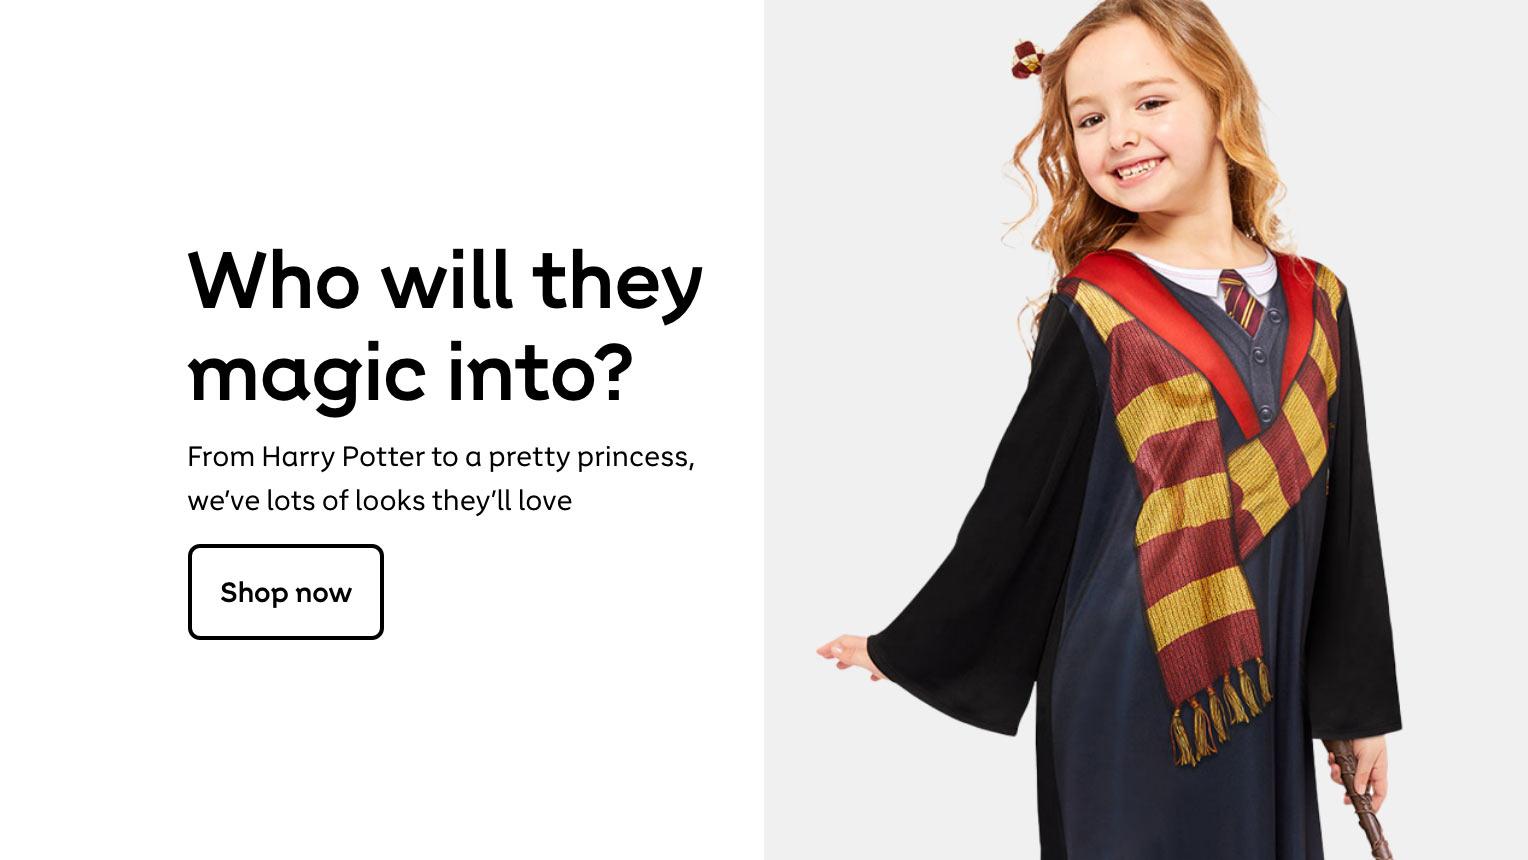 Who will they
magic into?
From Harry Potter to a
pretty princess, we've
lots of looks they'll love. Shop now.